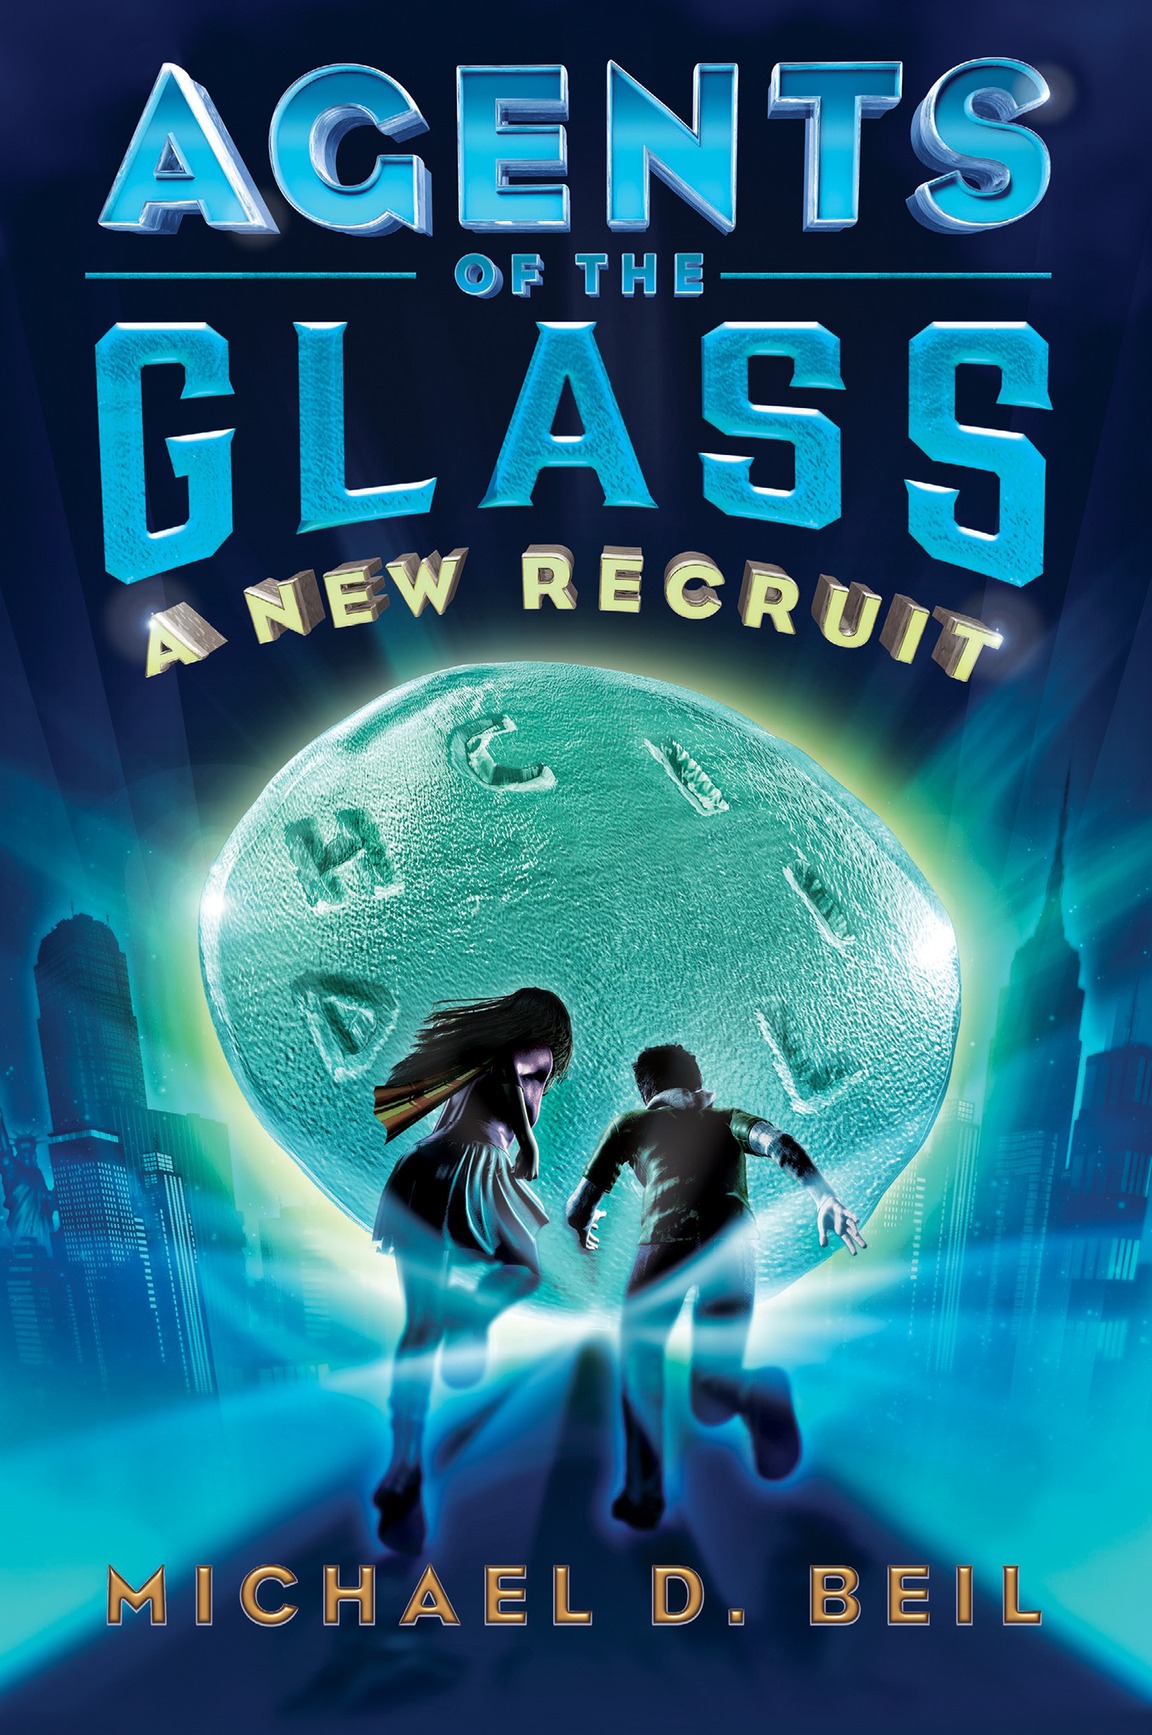 Agents of the Glass (2016) by Michael D. Beil